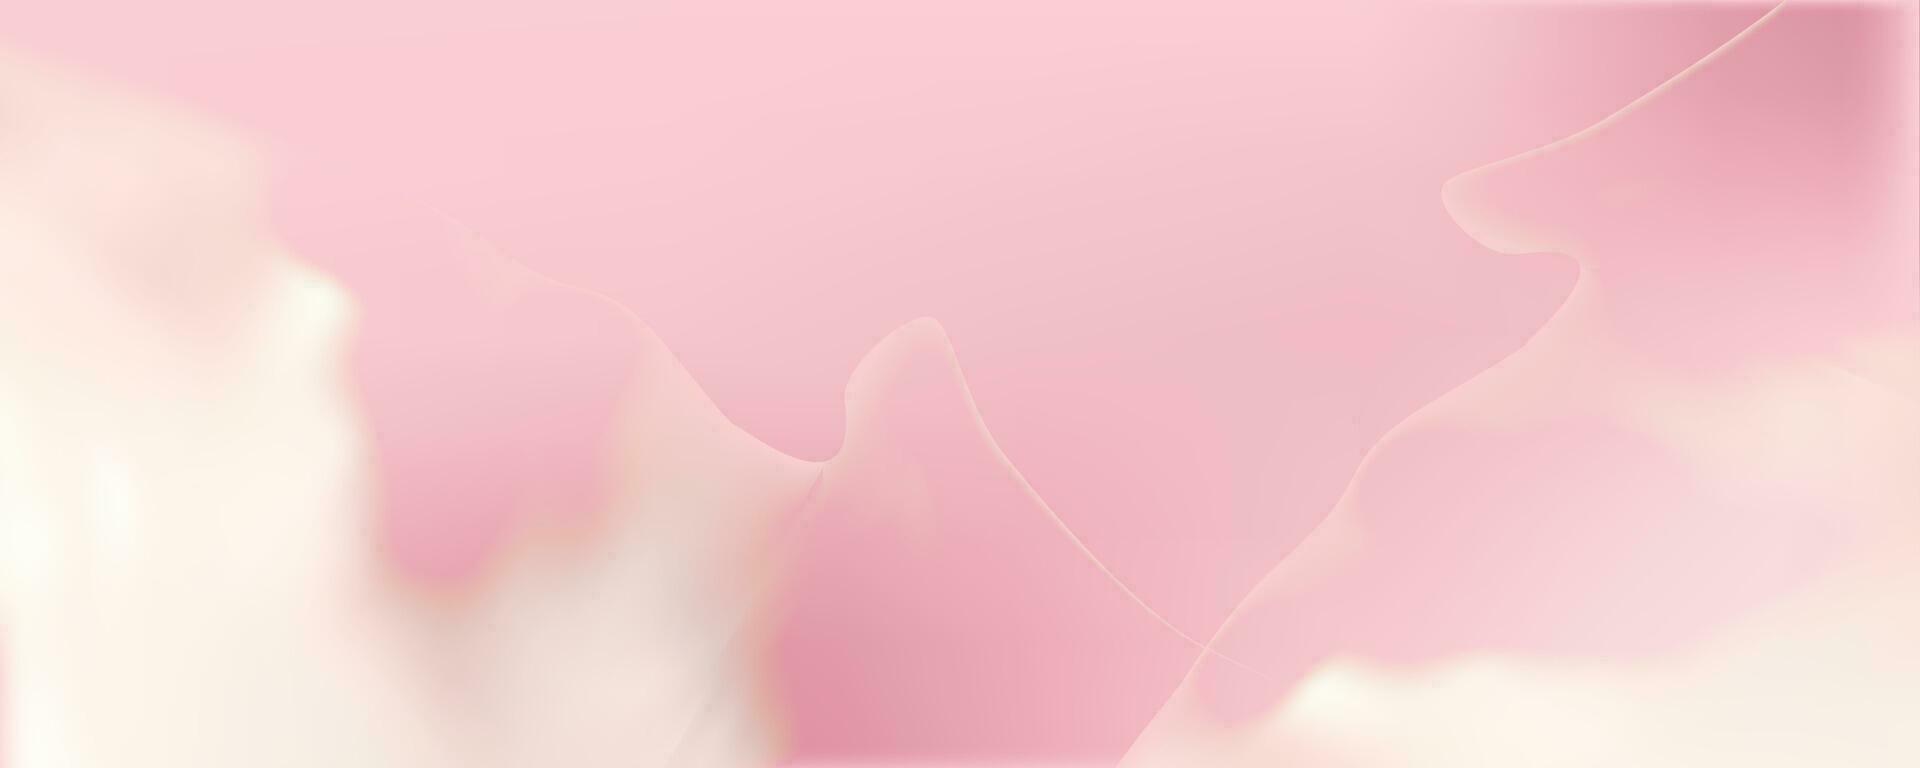 Pink spreading texture of cream, ice cream or icing. Light background of strawberry dessert, jelly or confectionery cream. vector